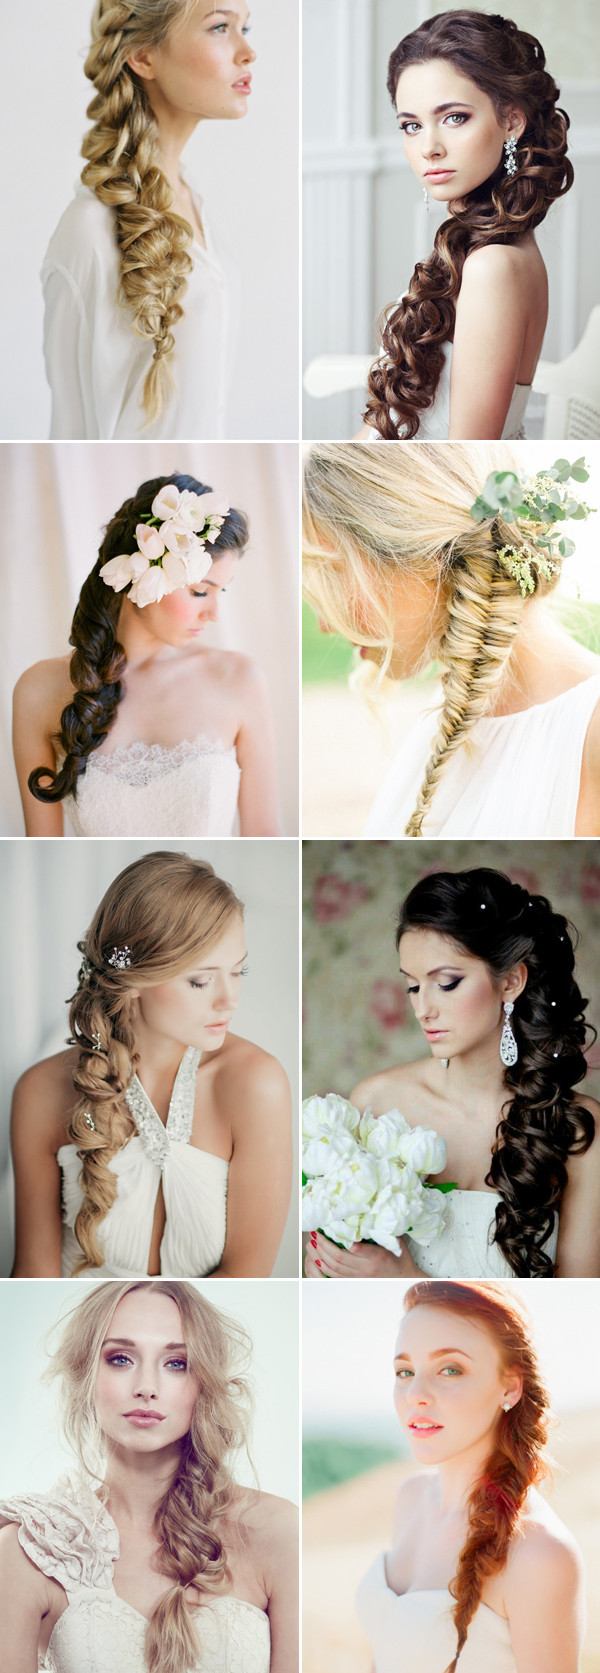 Wedding Hairstyle Side
 42 Steal Worthy Wedding Hairstyles for Long Hair